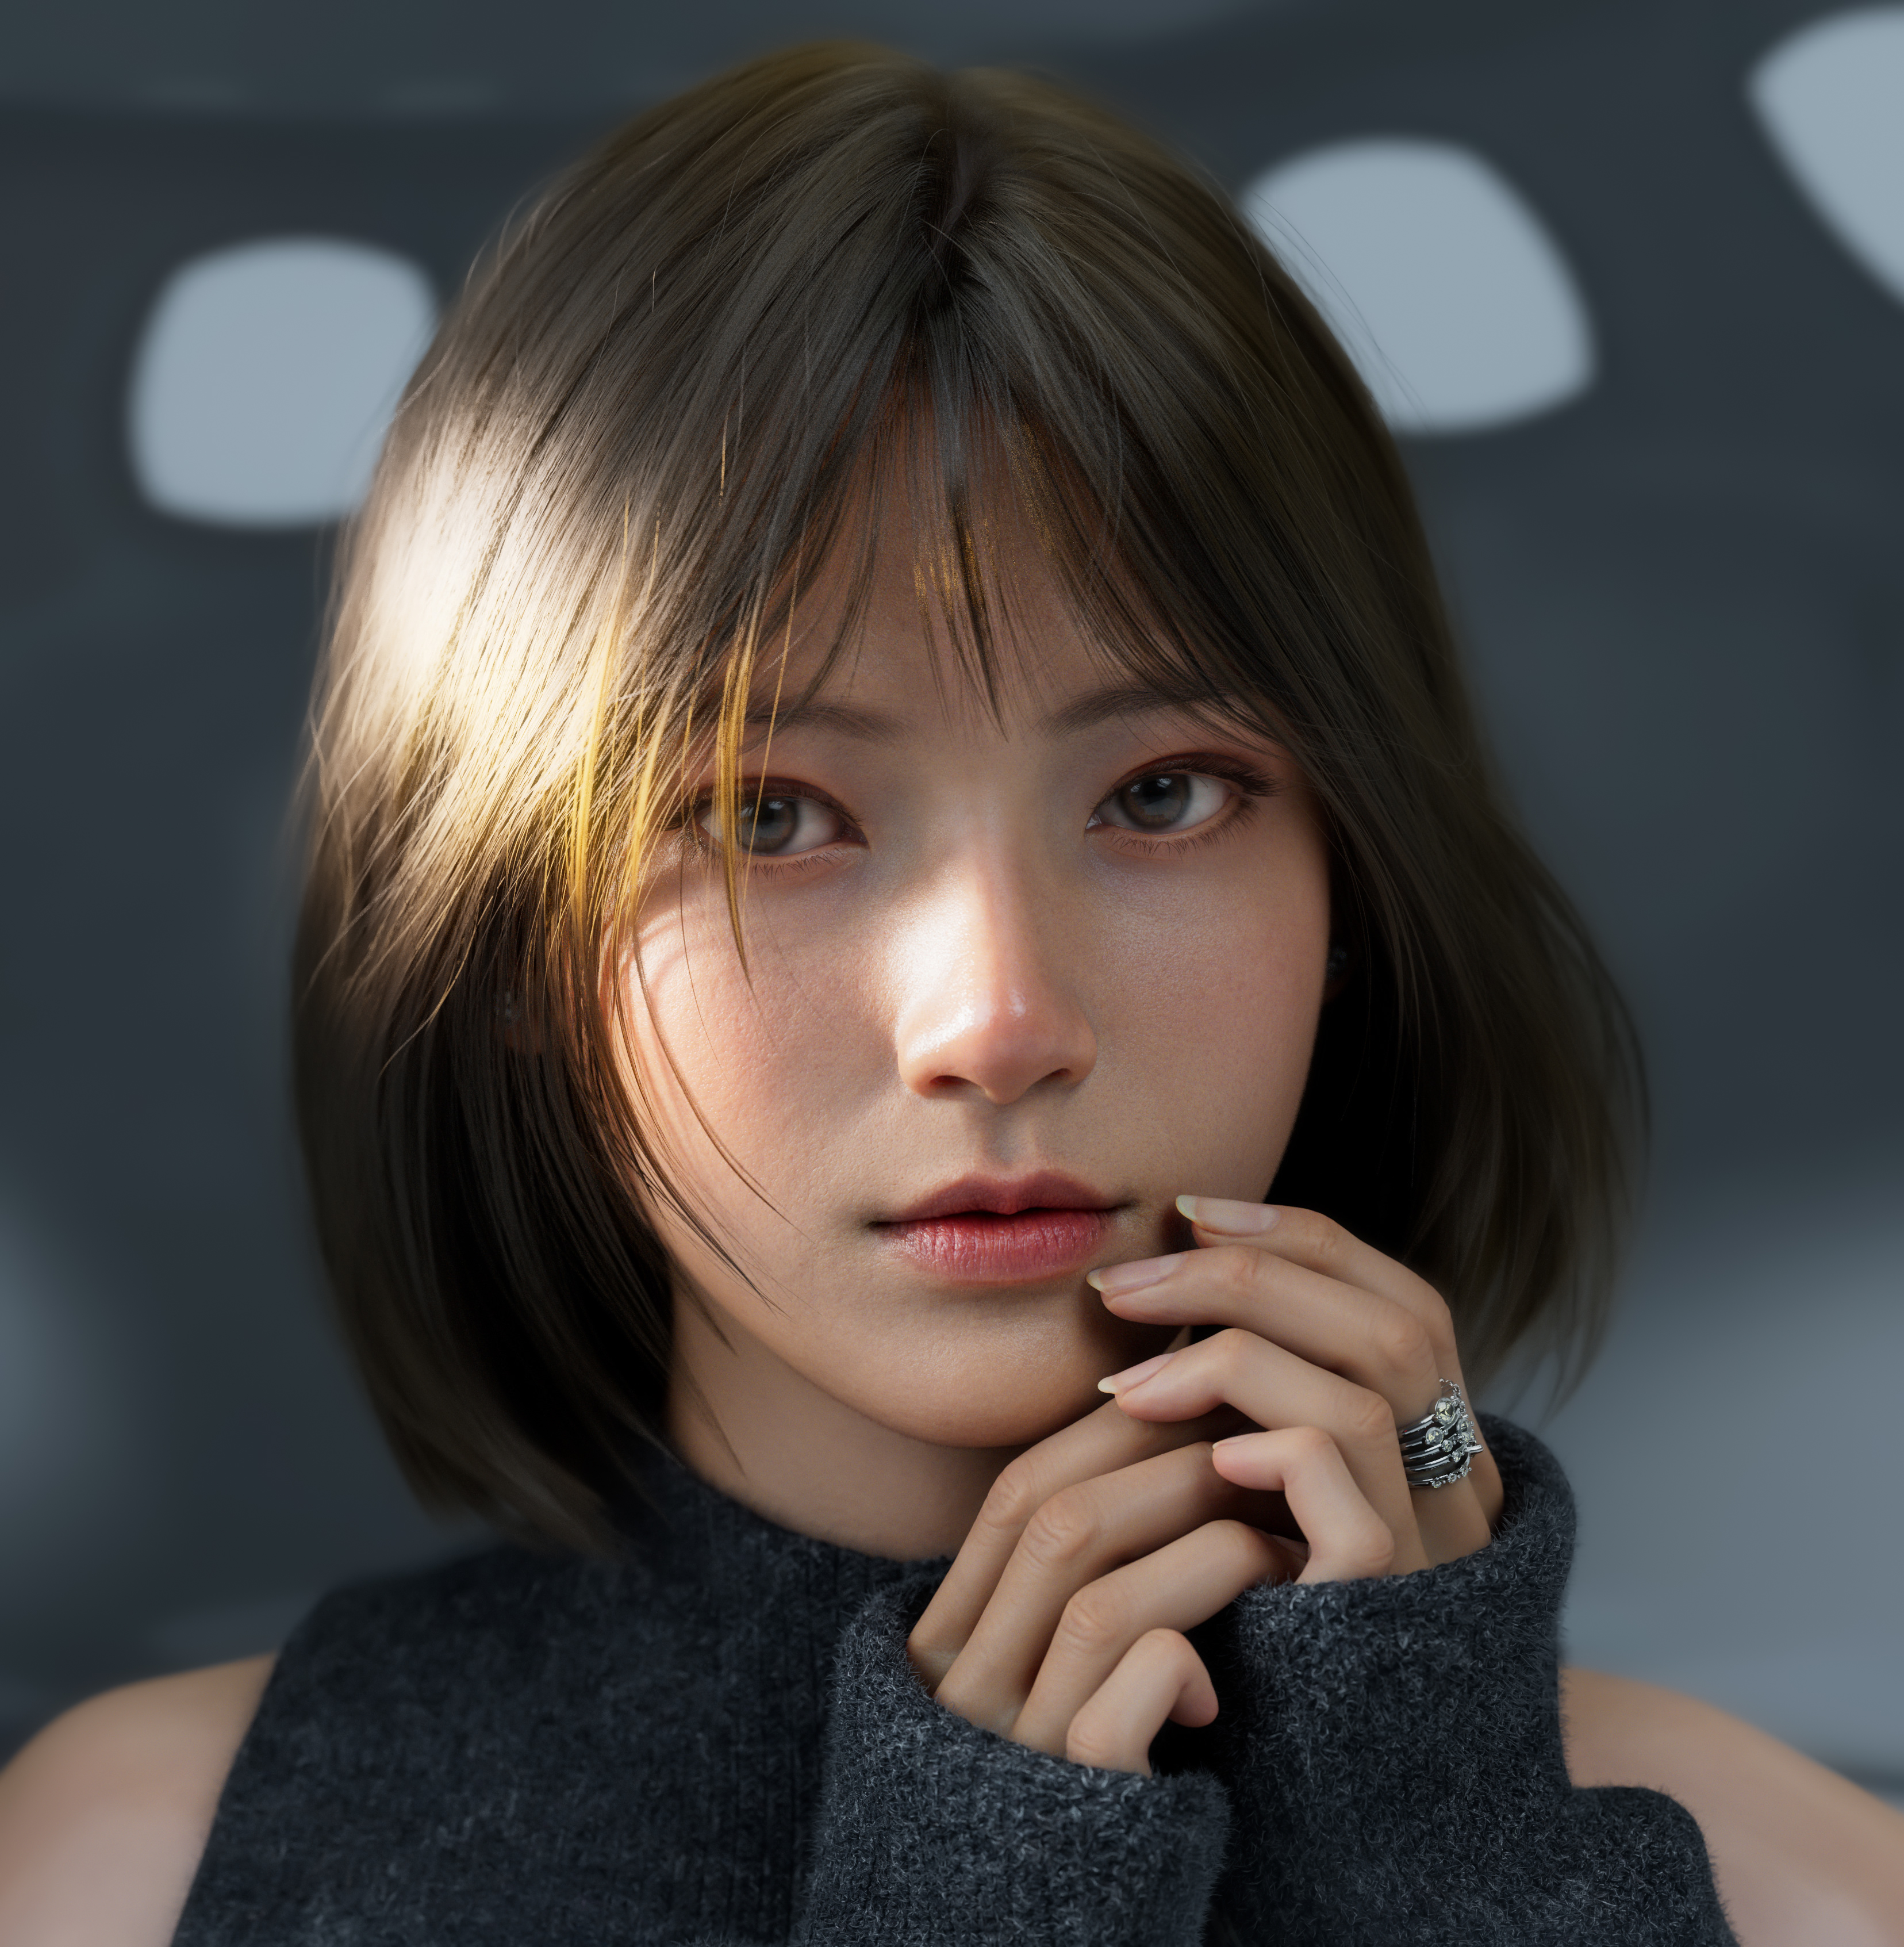 General 3312x3386 women Asian portrait rings sweater pale Glow Zhao simple background CGI looking at viewer brunette